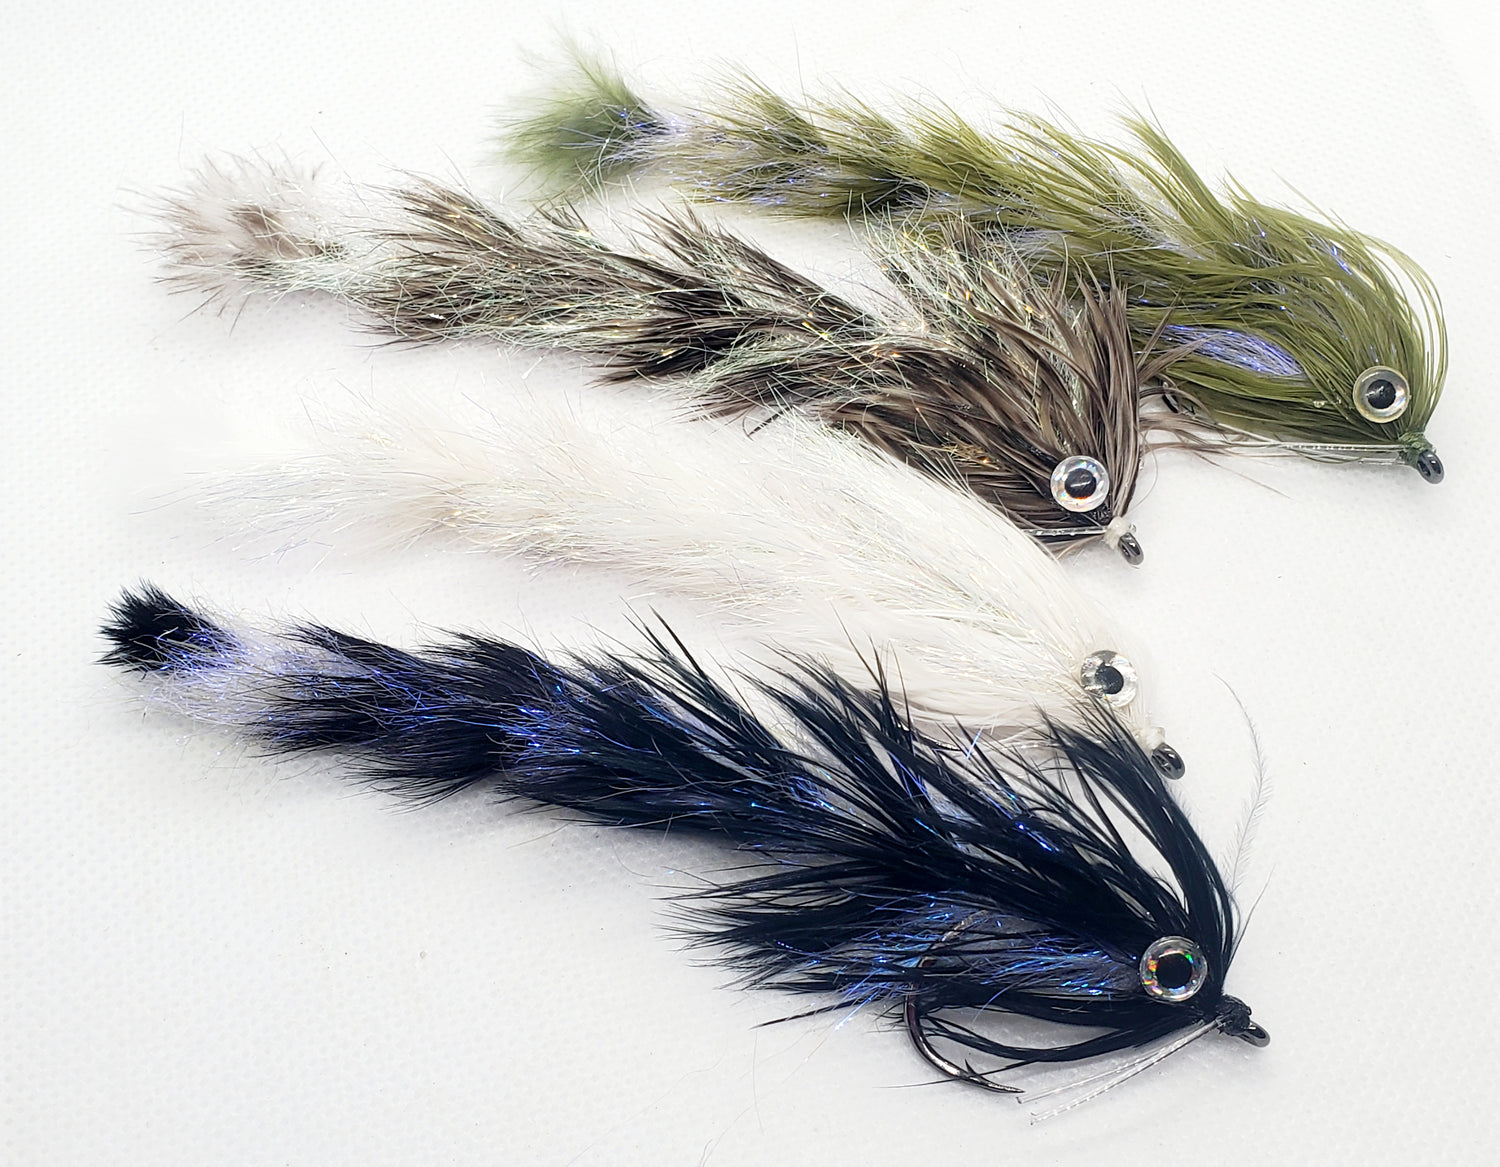 Feather Changer Fly, Chocklett's Game Changer, Feather Changer 4.5